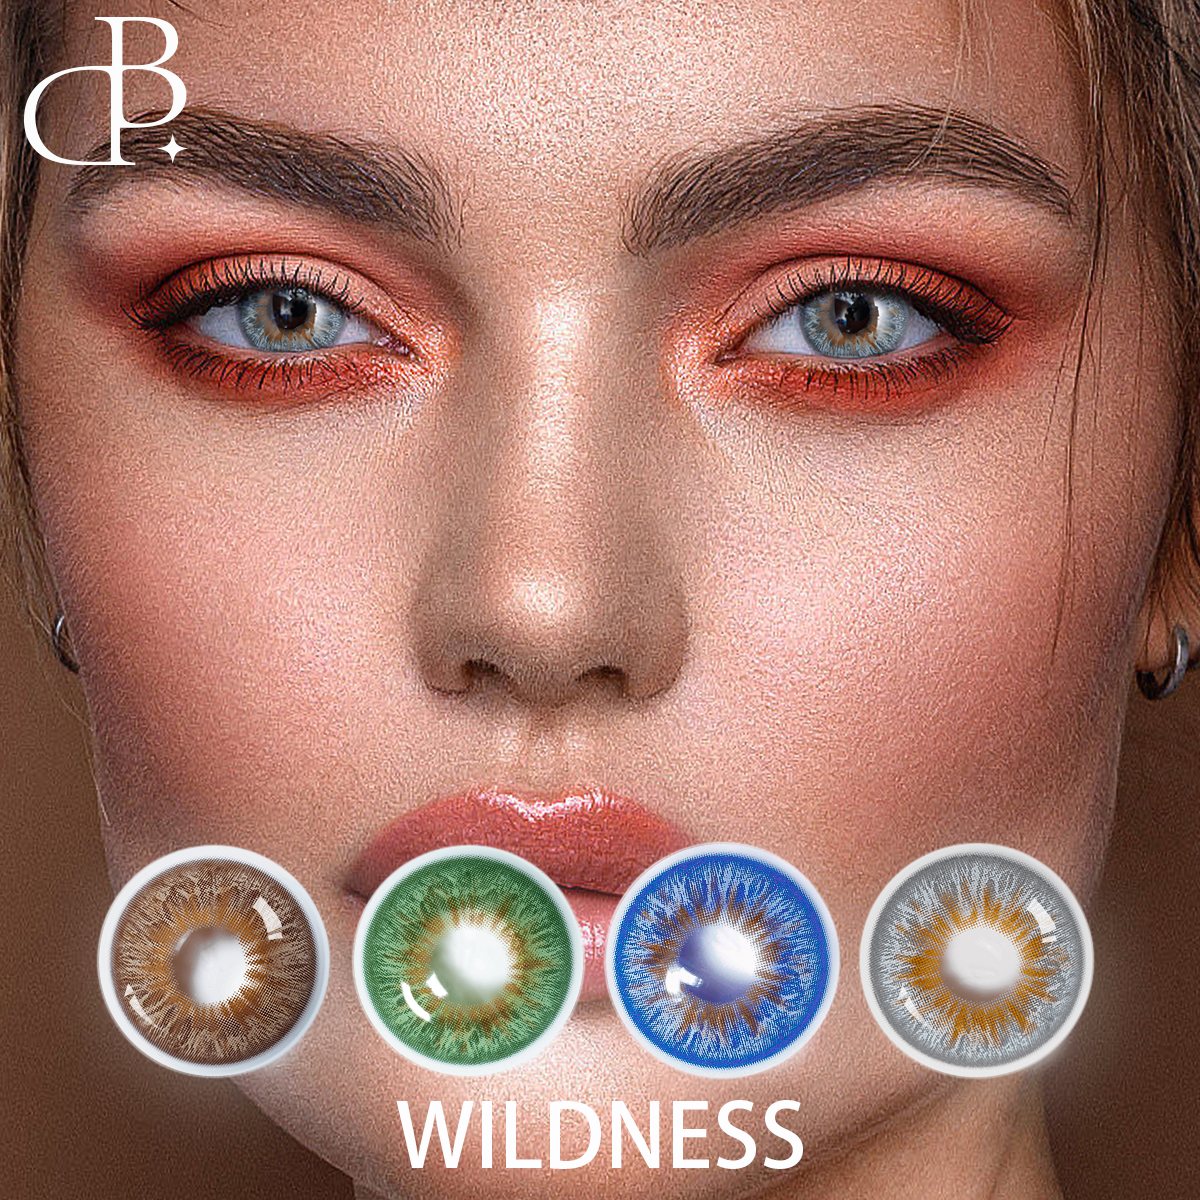 Wildness Colored Contact Lens Yearly Use Cosmetic Contact Lenses Eye Color Beauty Colors Lens for dark eyes